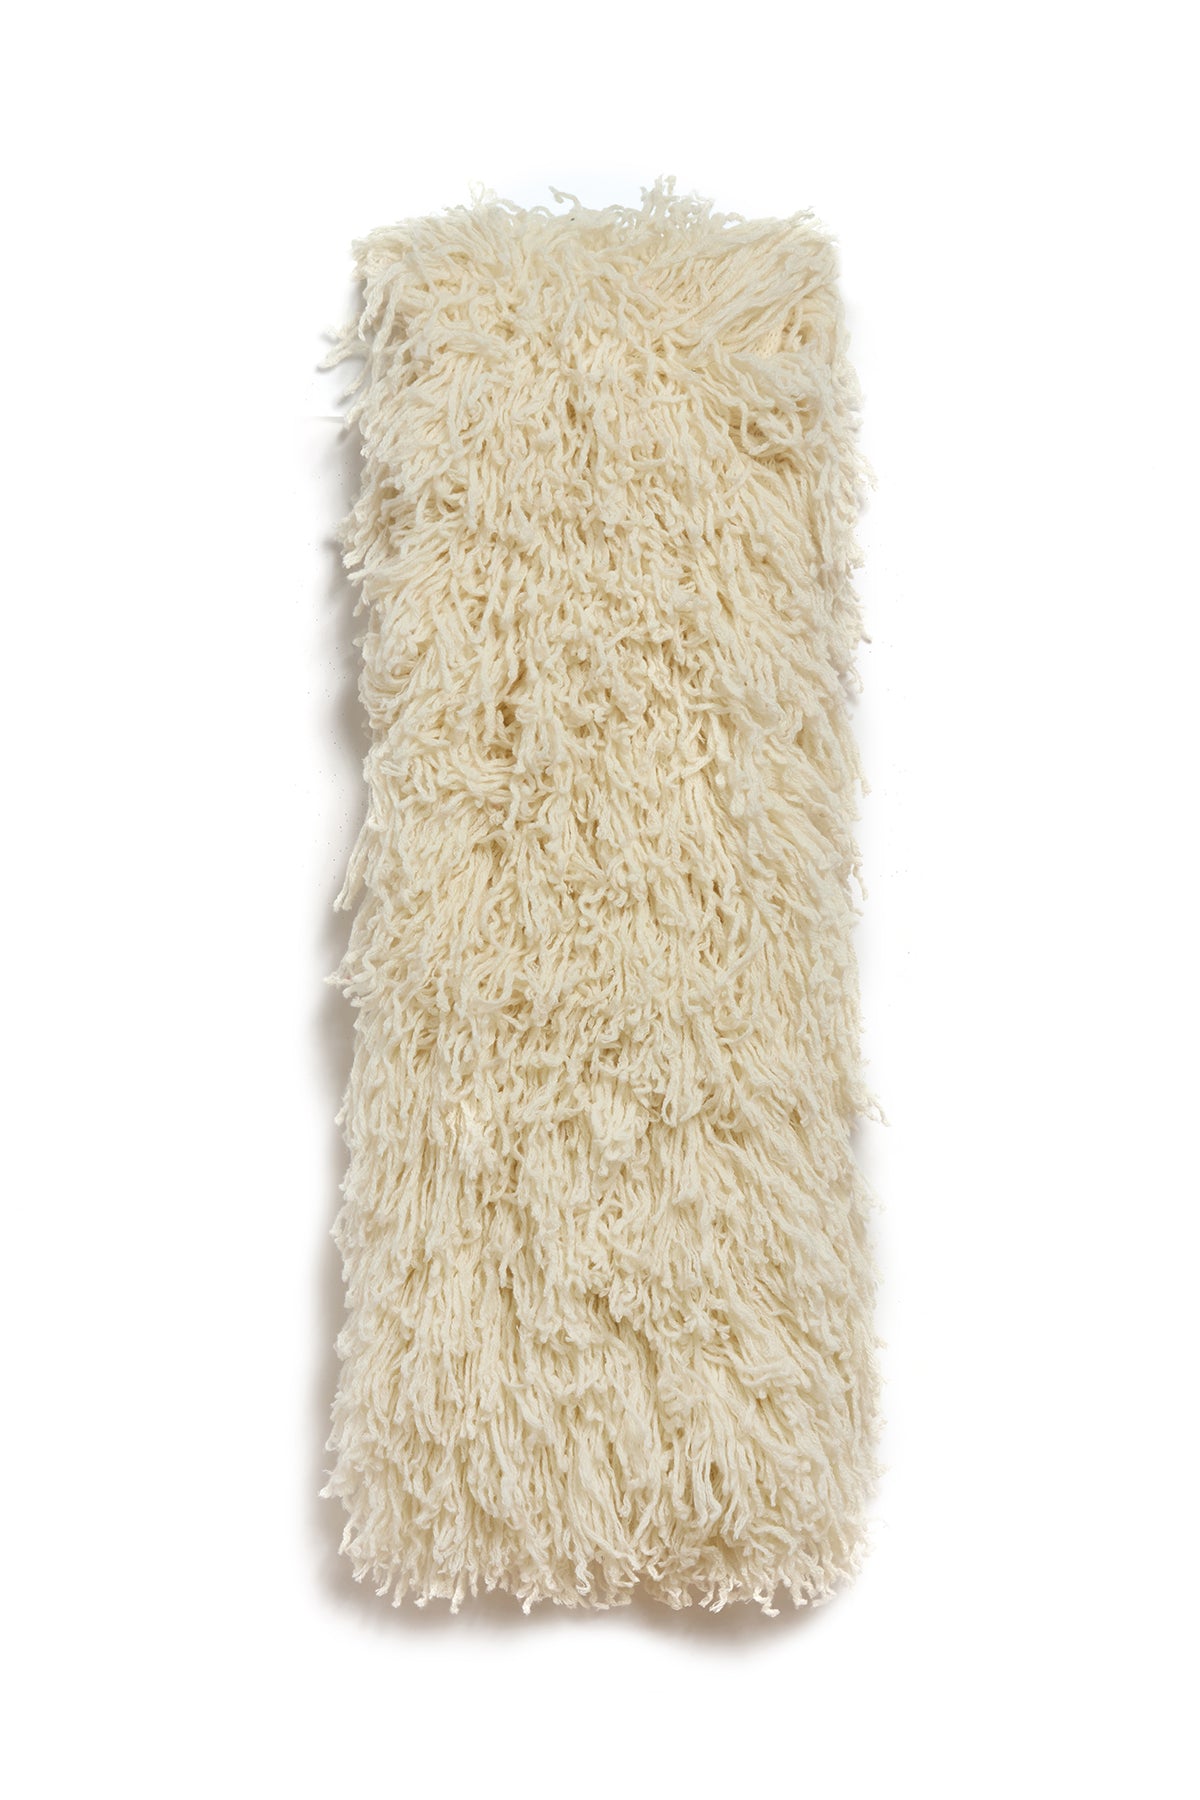 Hargreaves Knit Scarf in Ivory Virgin Wool Cashmere Silk